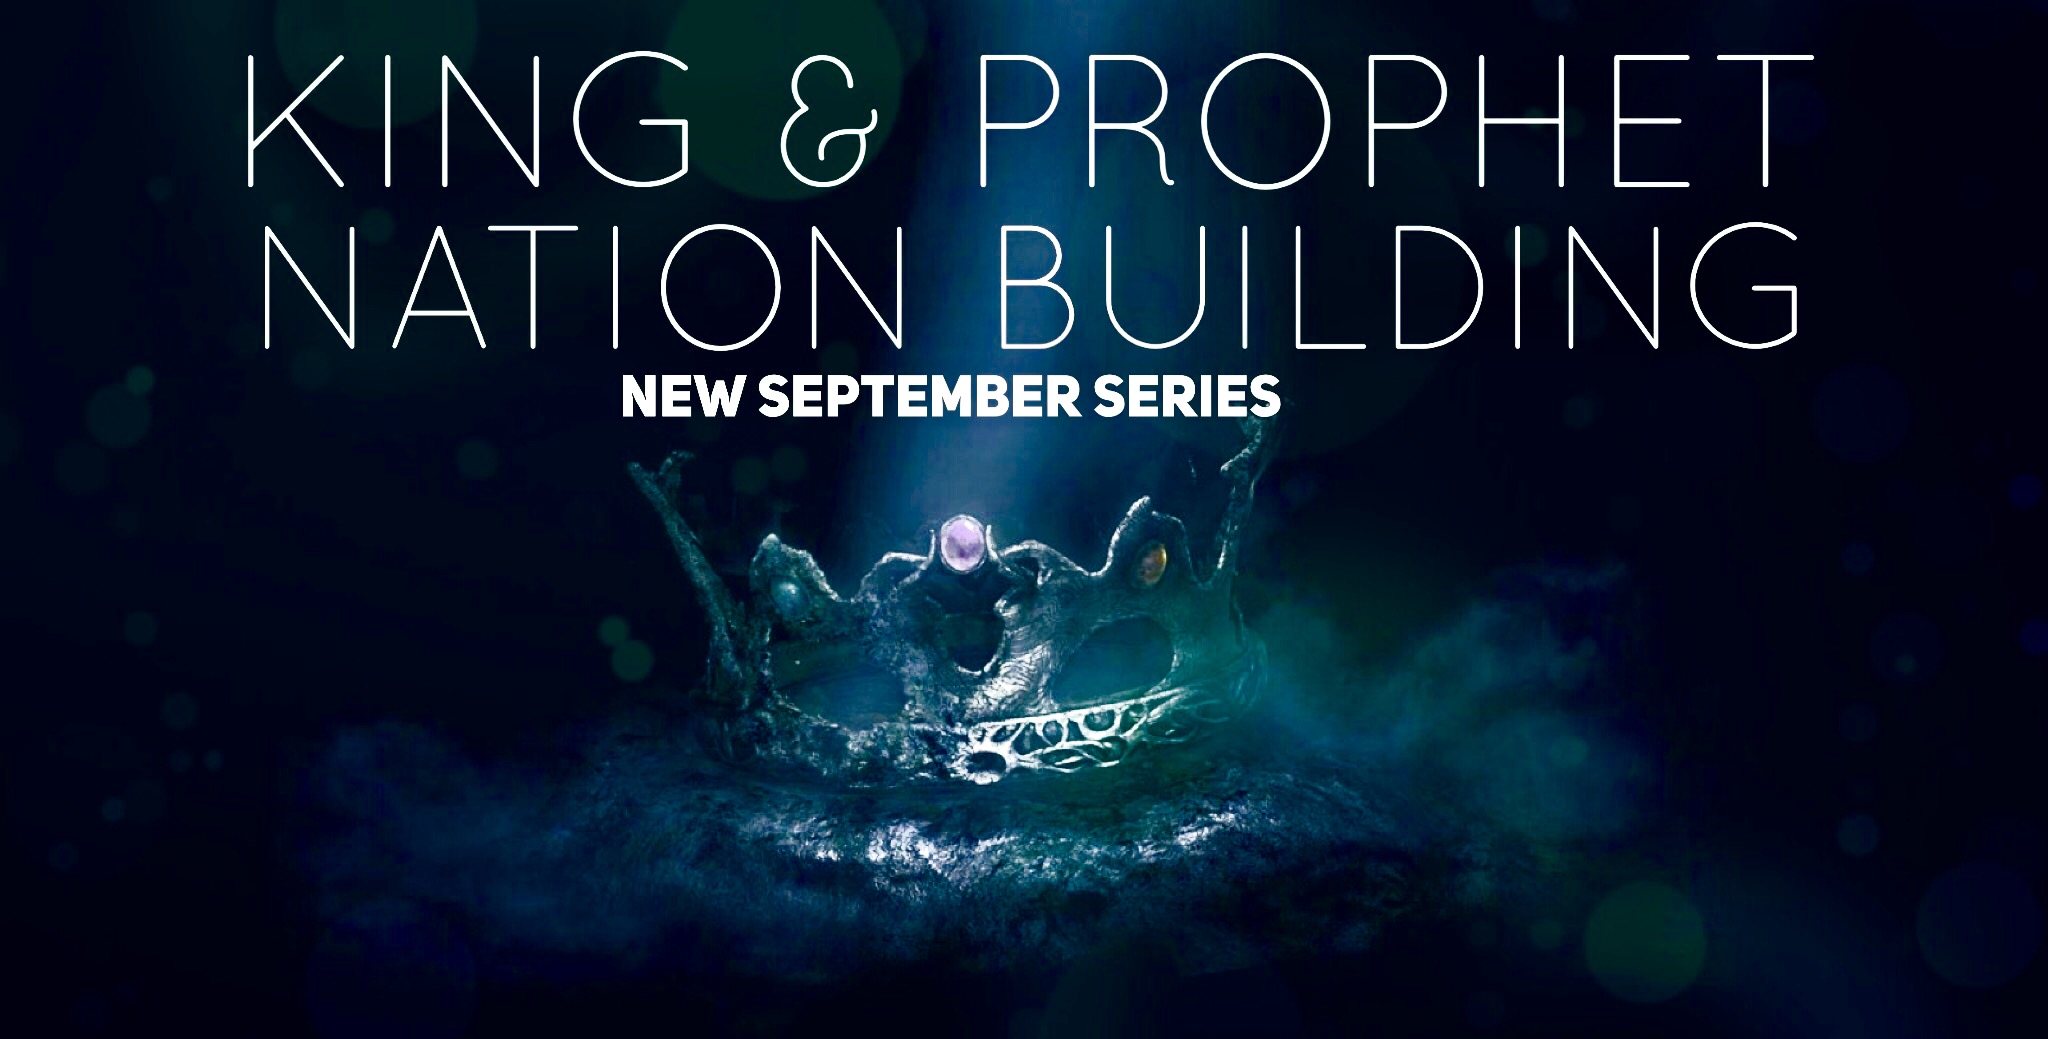 King & Prophet 3 Nation Building (Marriage On The Rock)